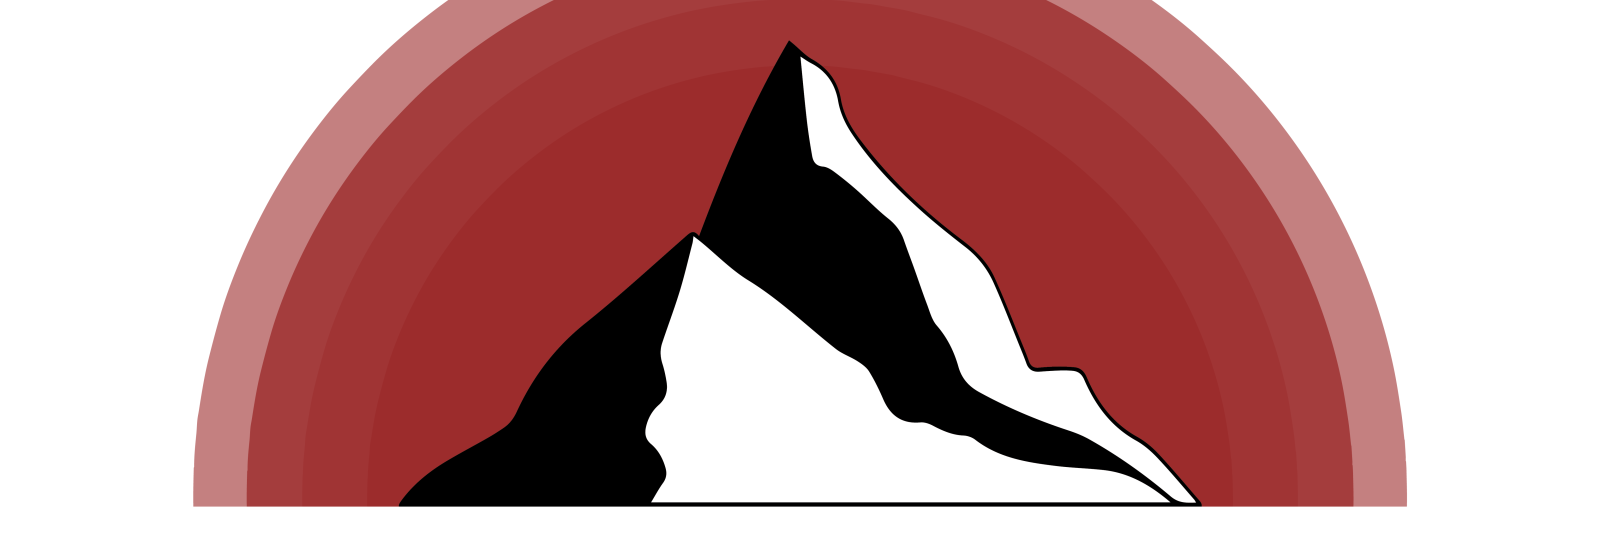 Illustration of an iceberg with radiating red circles behind